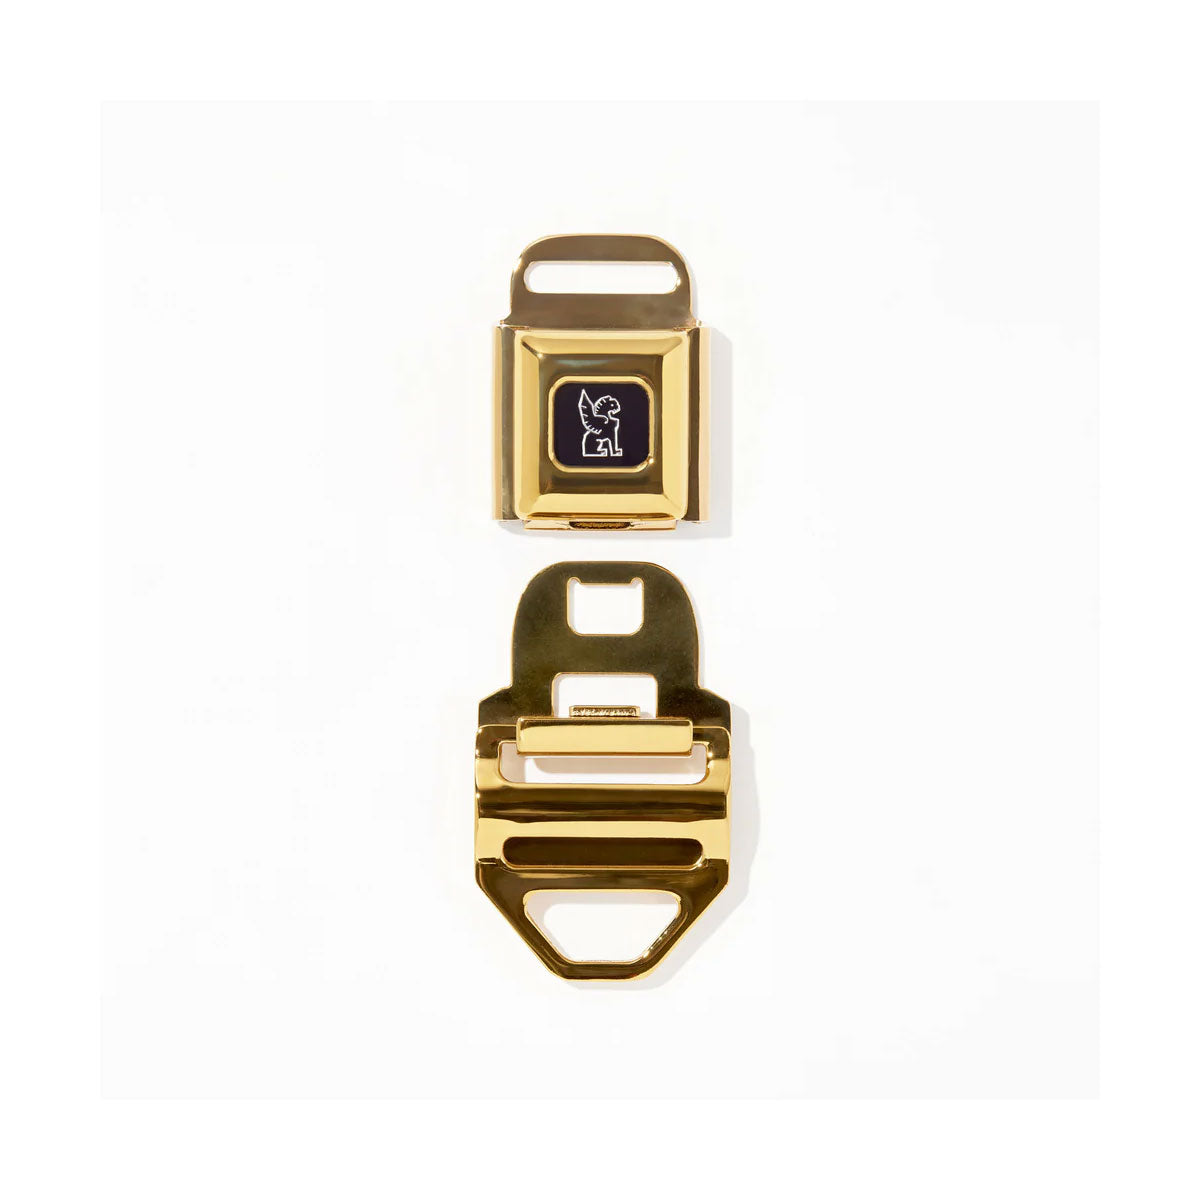 Chrome Industries: Seatbelt Buckle MD (1.5") : Gold